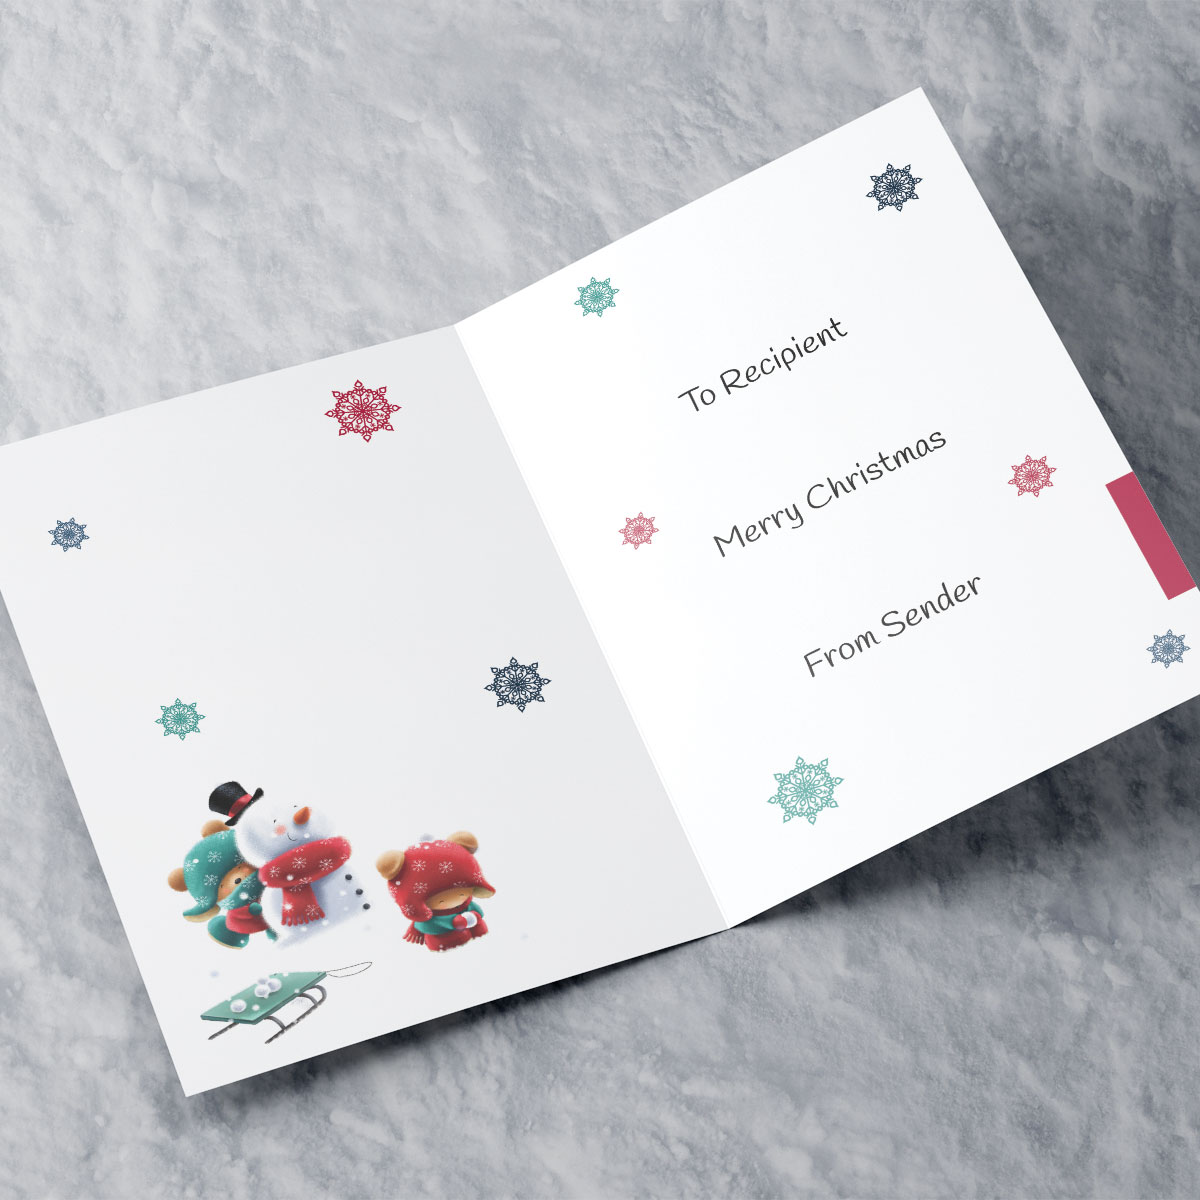 Personalised Hugs Christmas Card - Snowball Fight